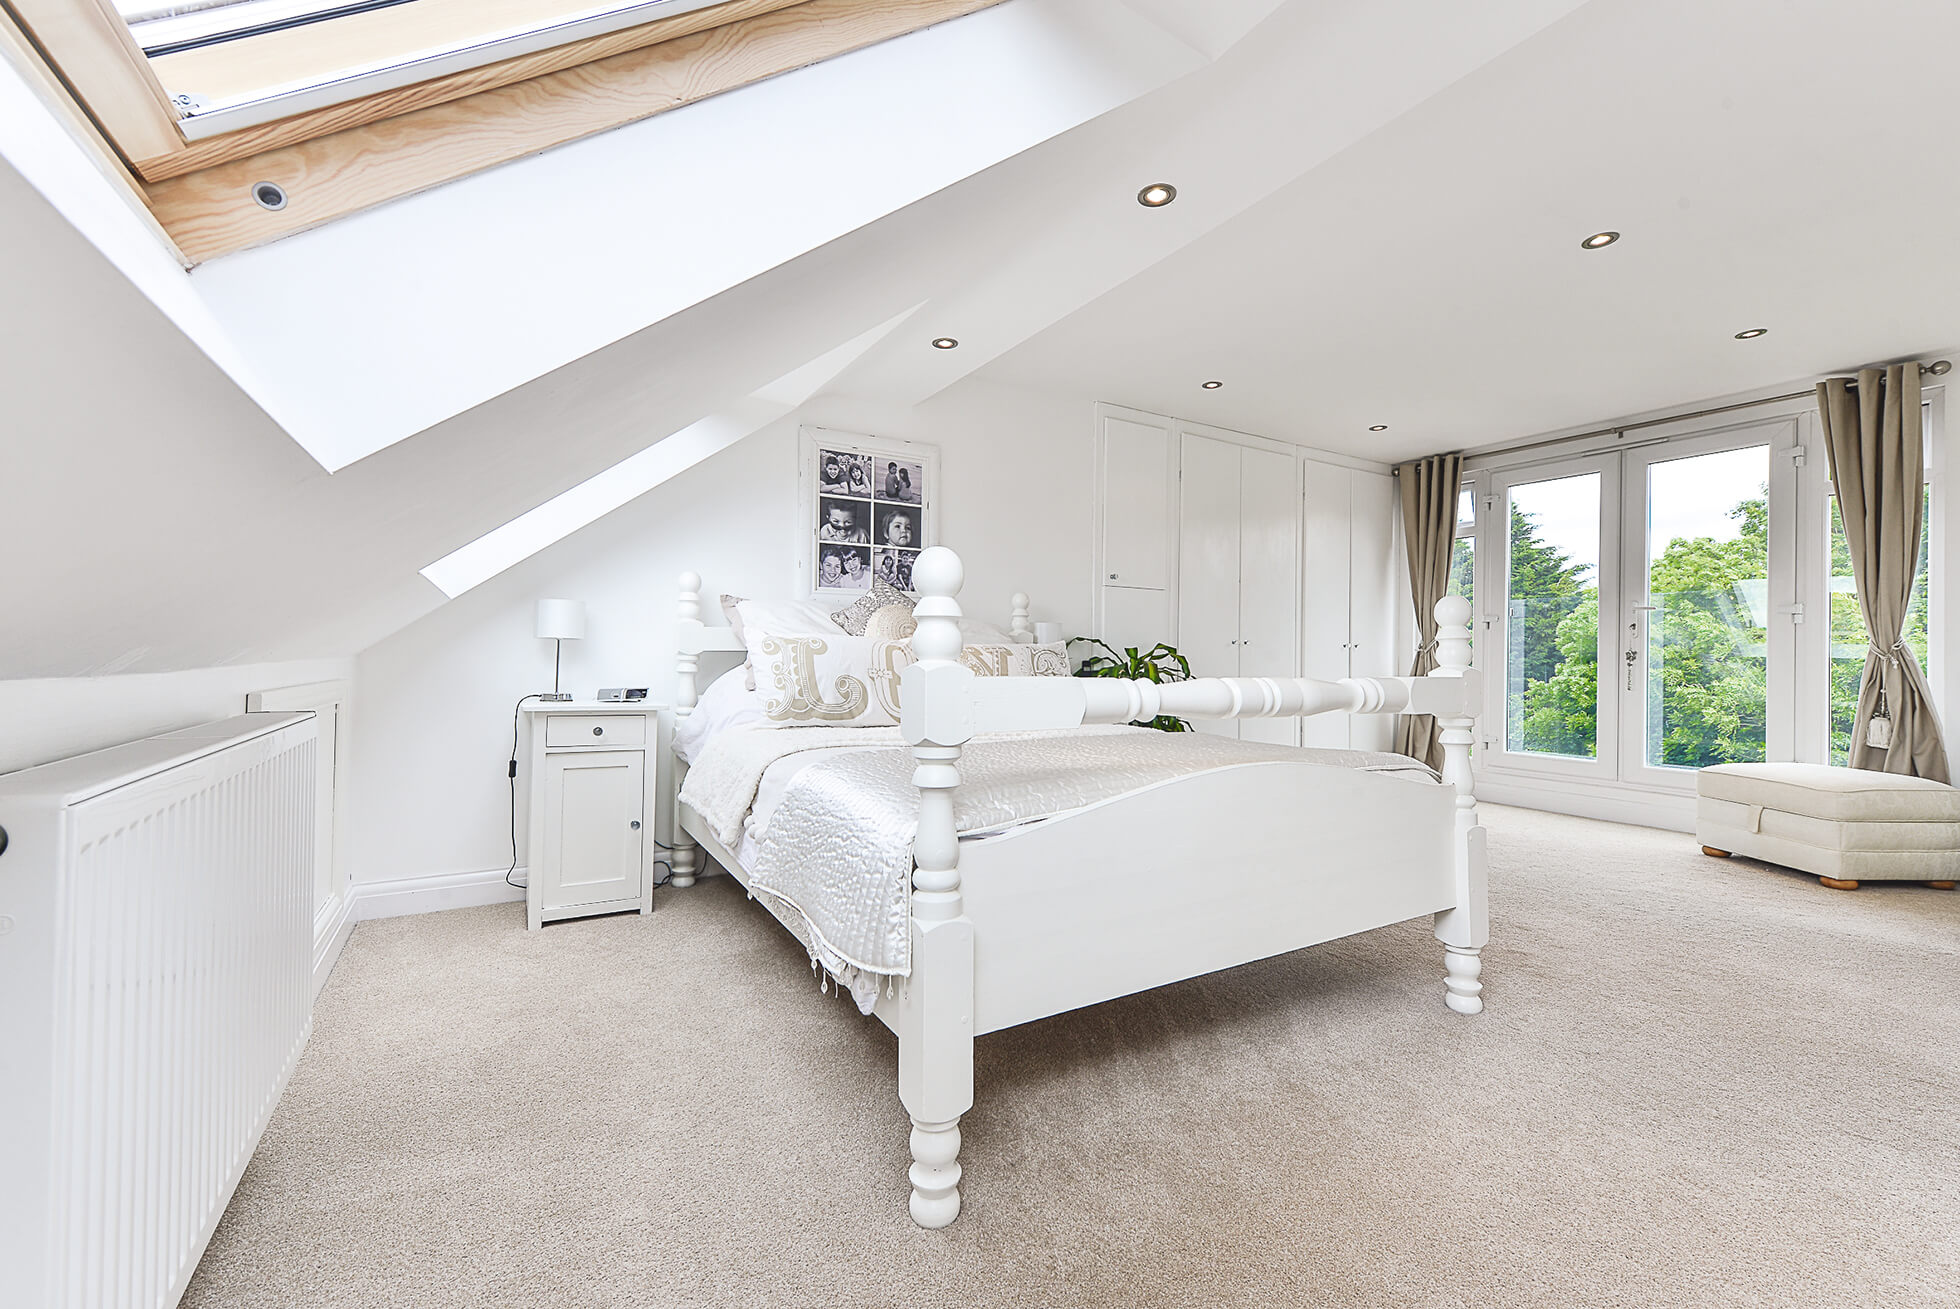 Do you have a question about converting your Loft in Bedmond? Here are the most popular questions asked by our clients.